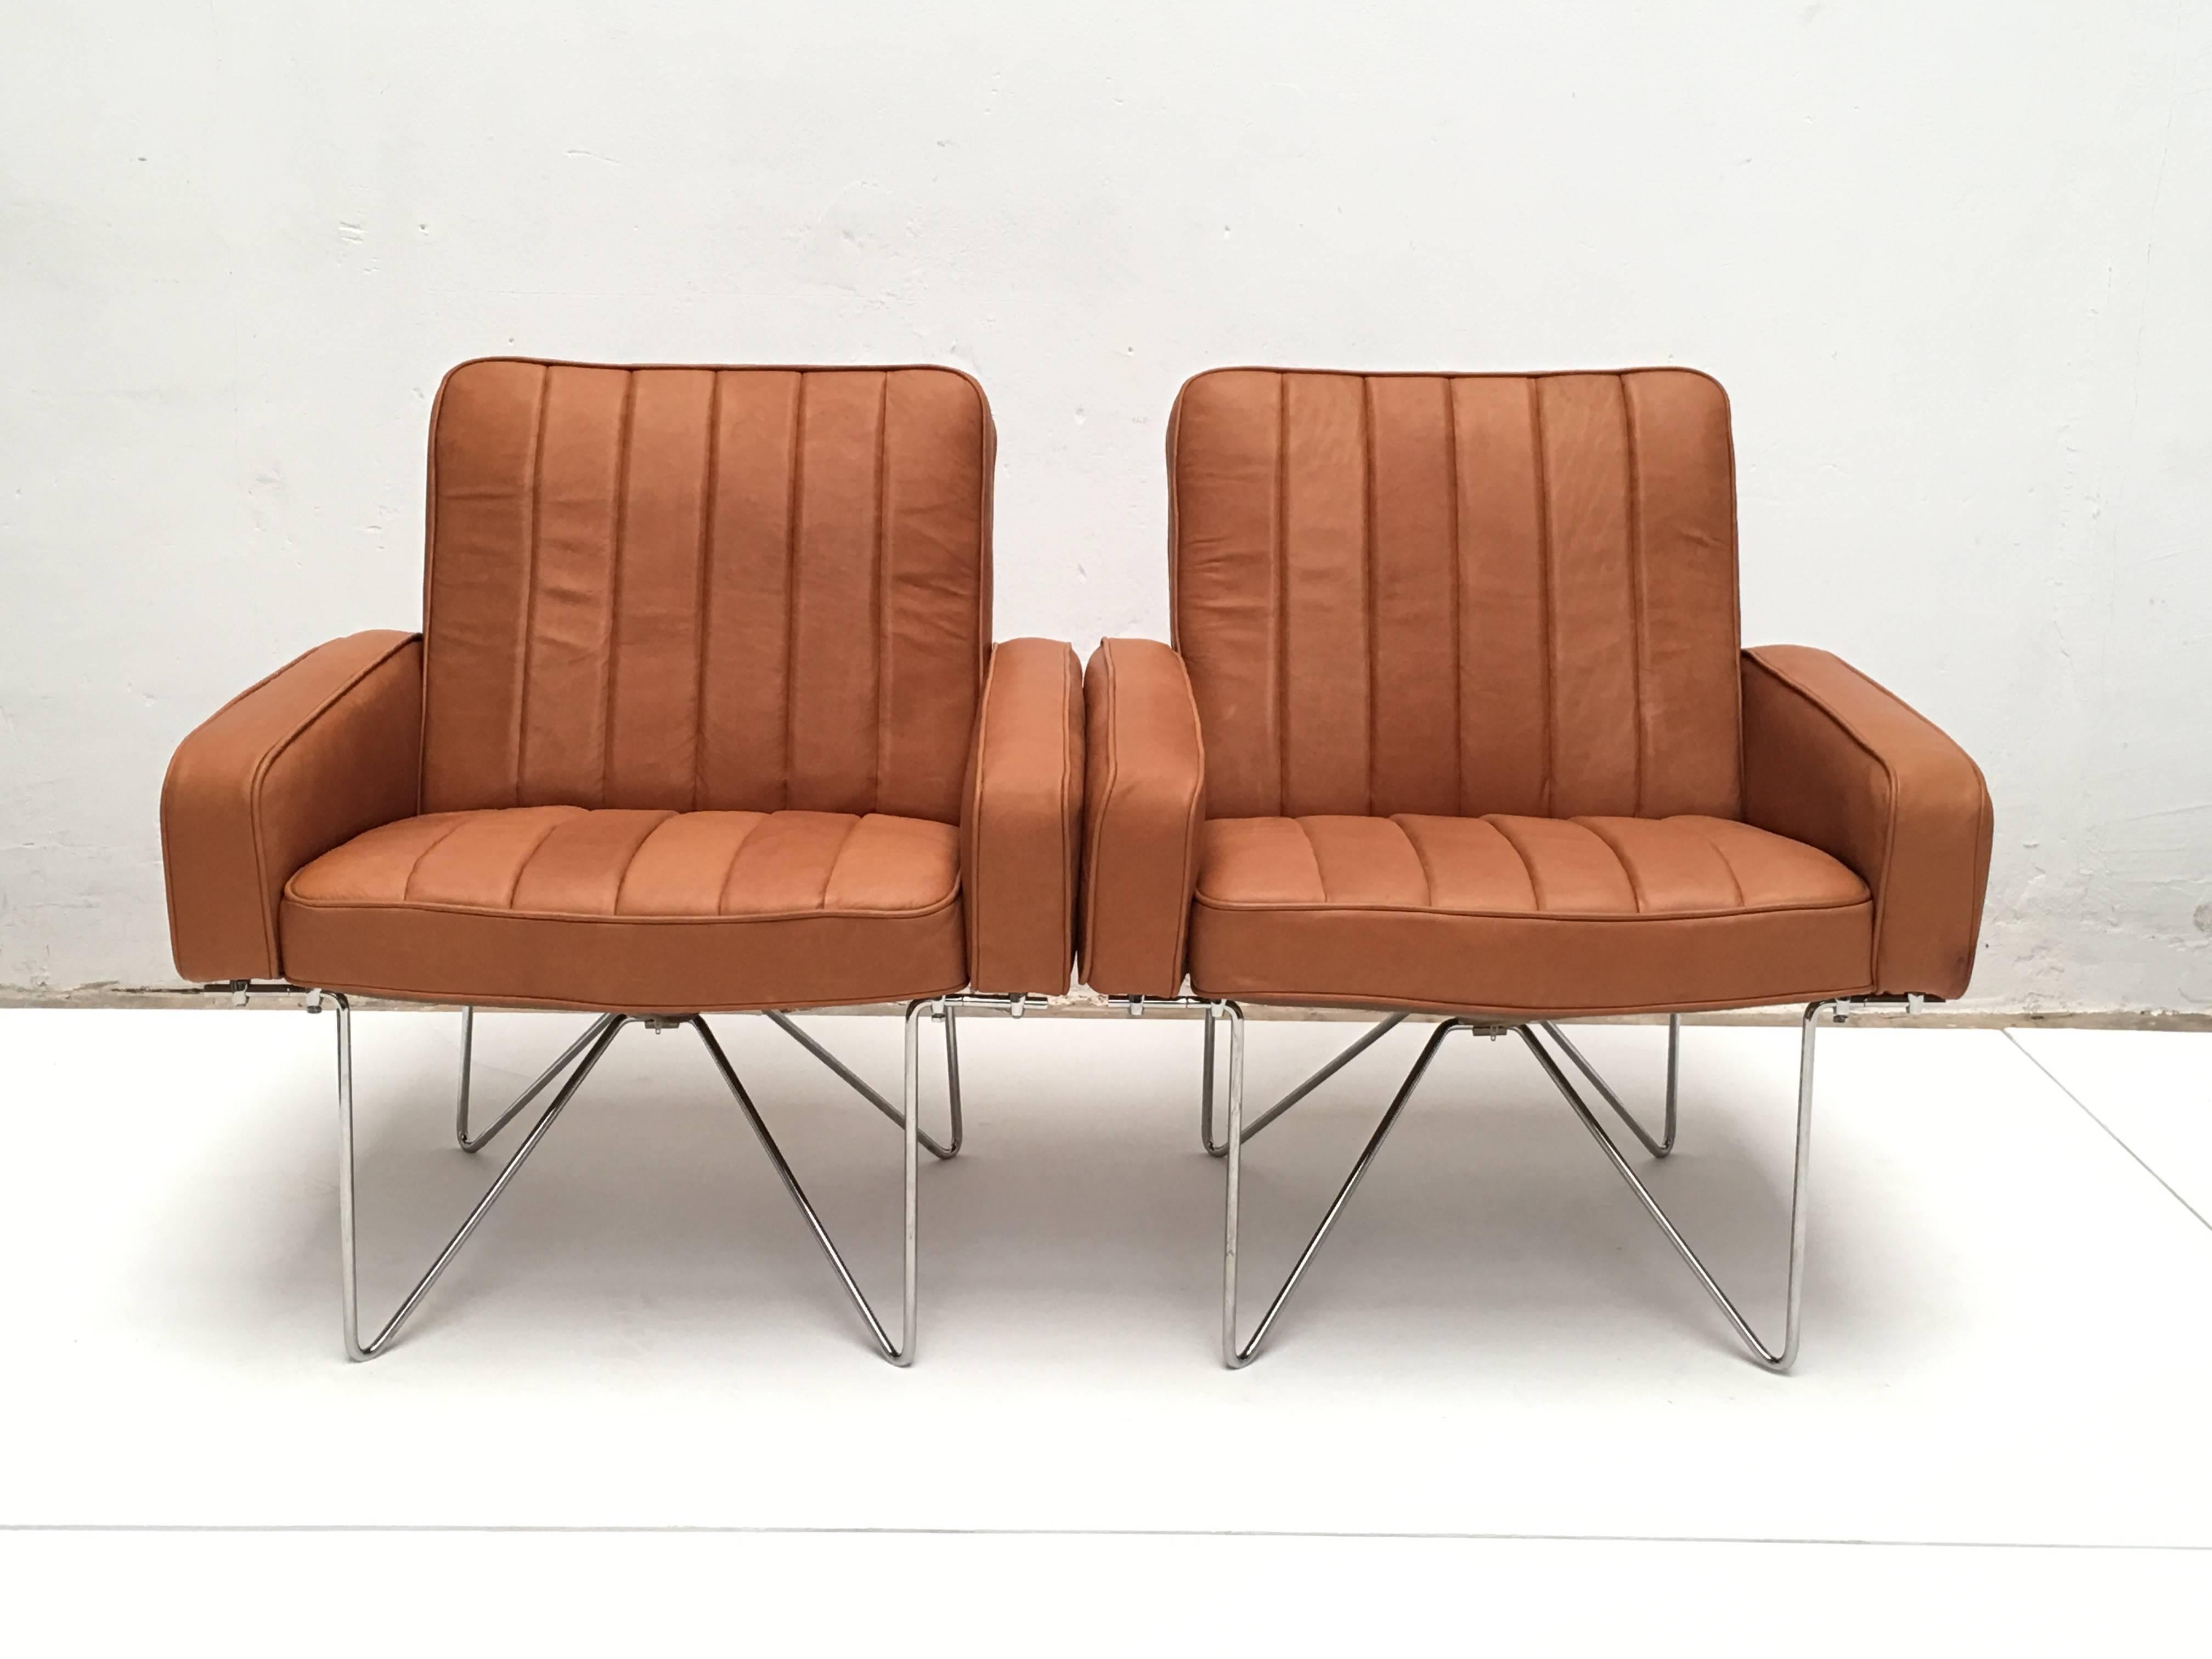 Rare pair of Dutch easy chairs attributed to designer Hein Salomonson for A. Polak 1960s

Beautiful chromed steel wire base with natural brown aniline leather upholstery

The seatings are reminiscent to the early Volkswagen car